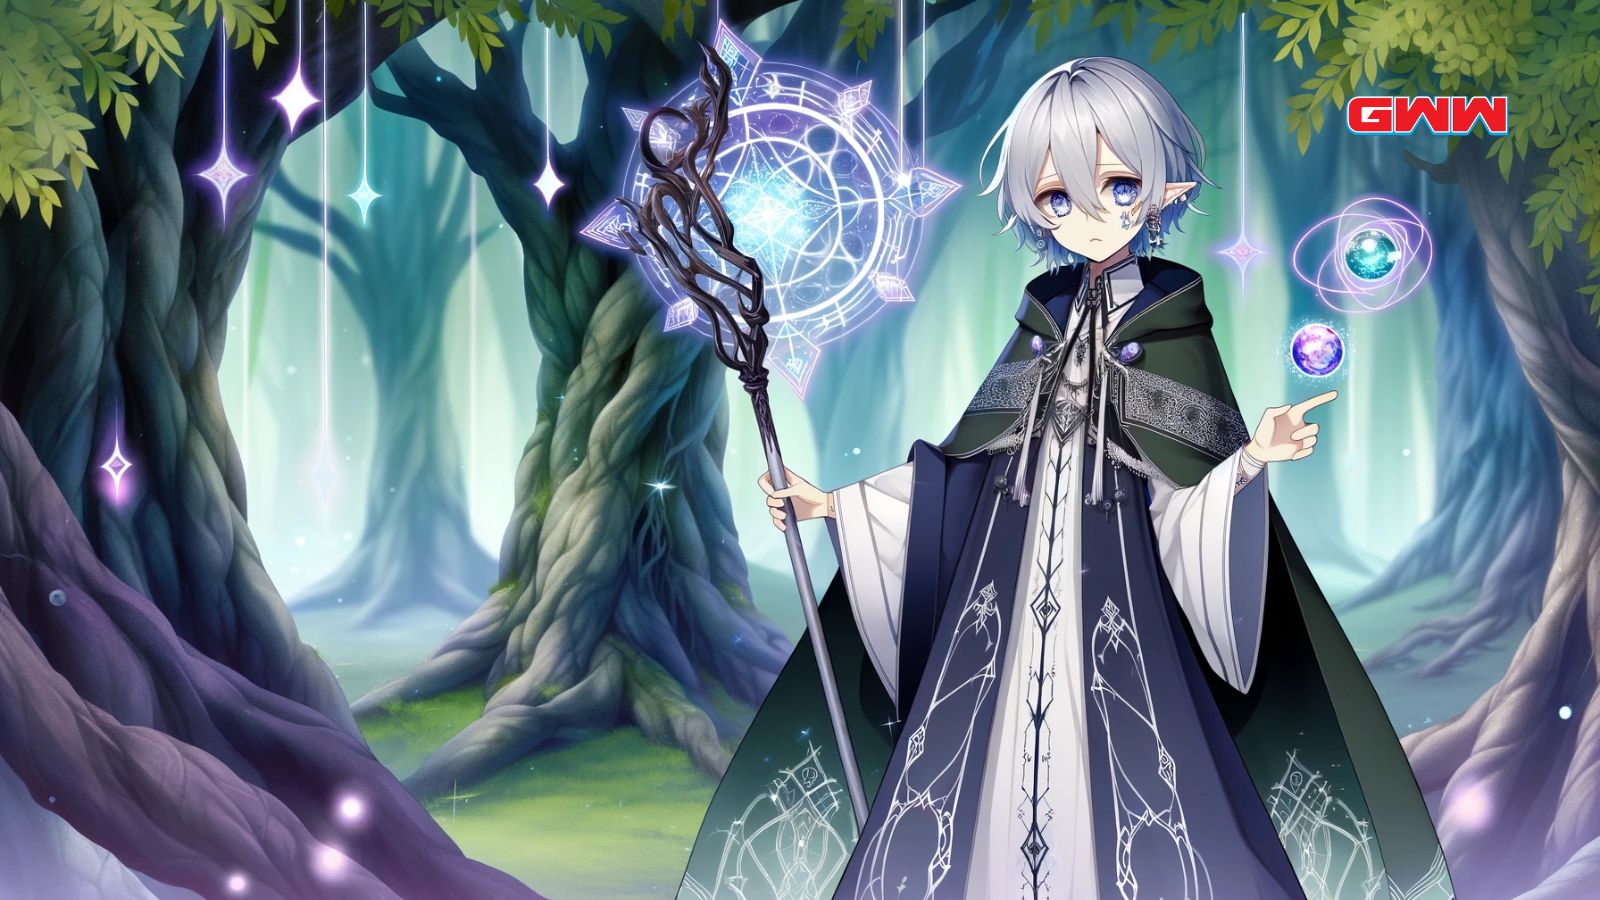 Anime-style depiction of a mystical wizard named Frieren, set in a magical forest. 